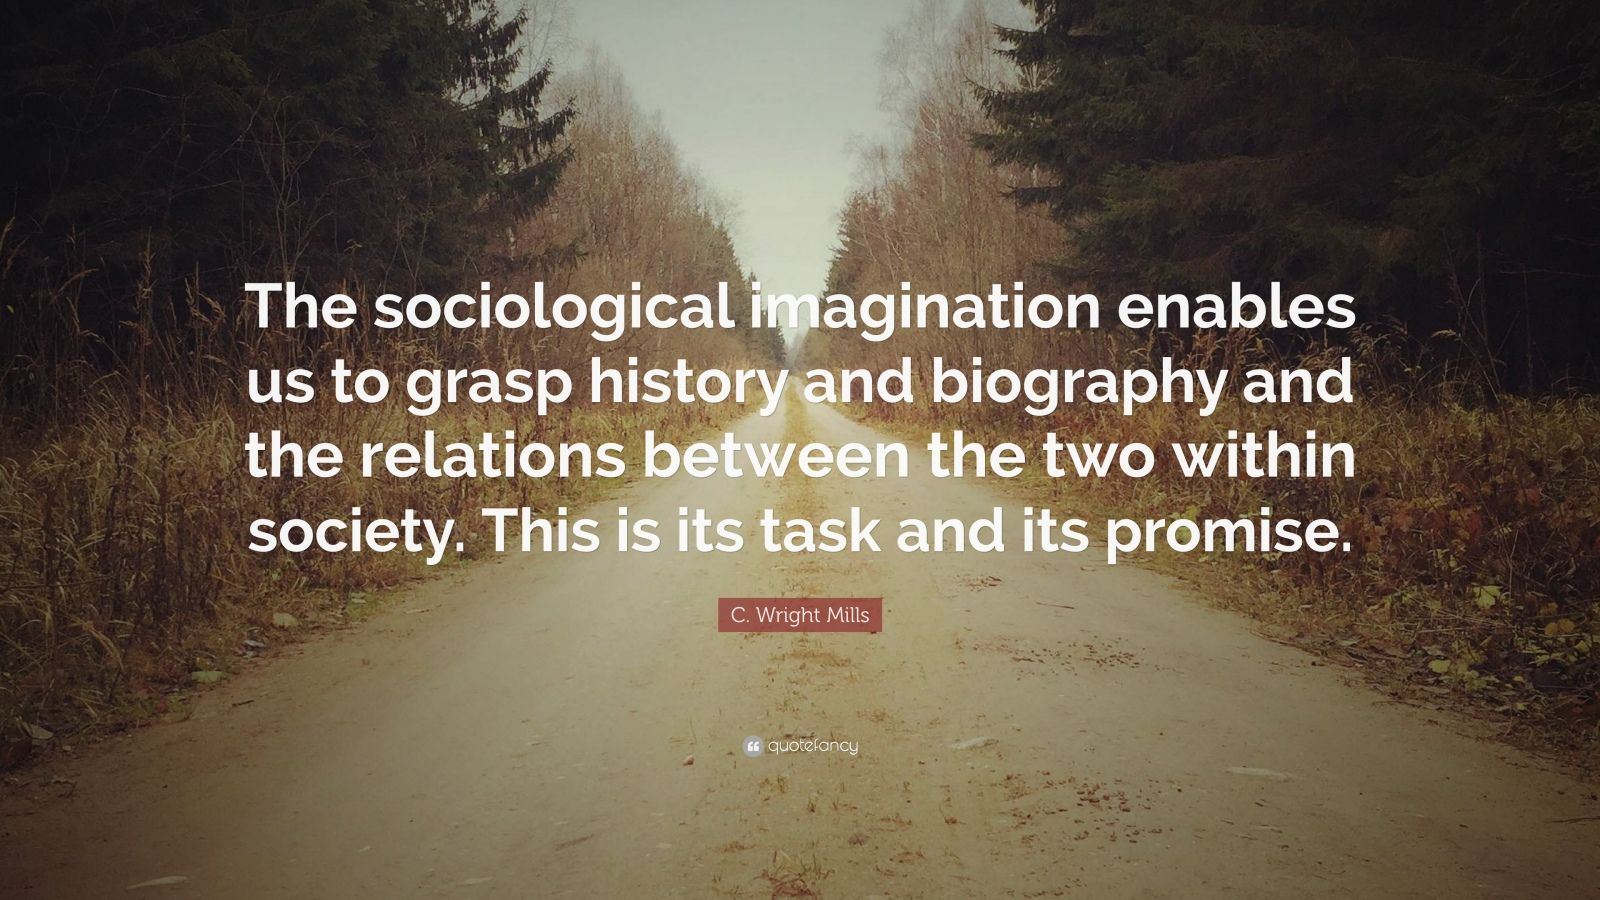 the sociological imagination the promise